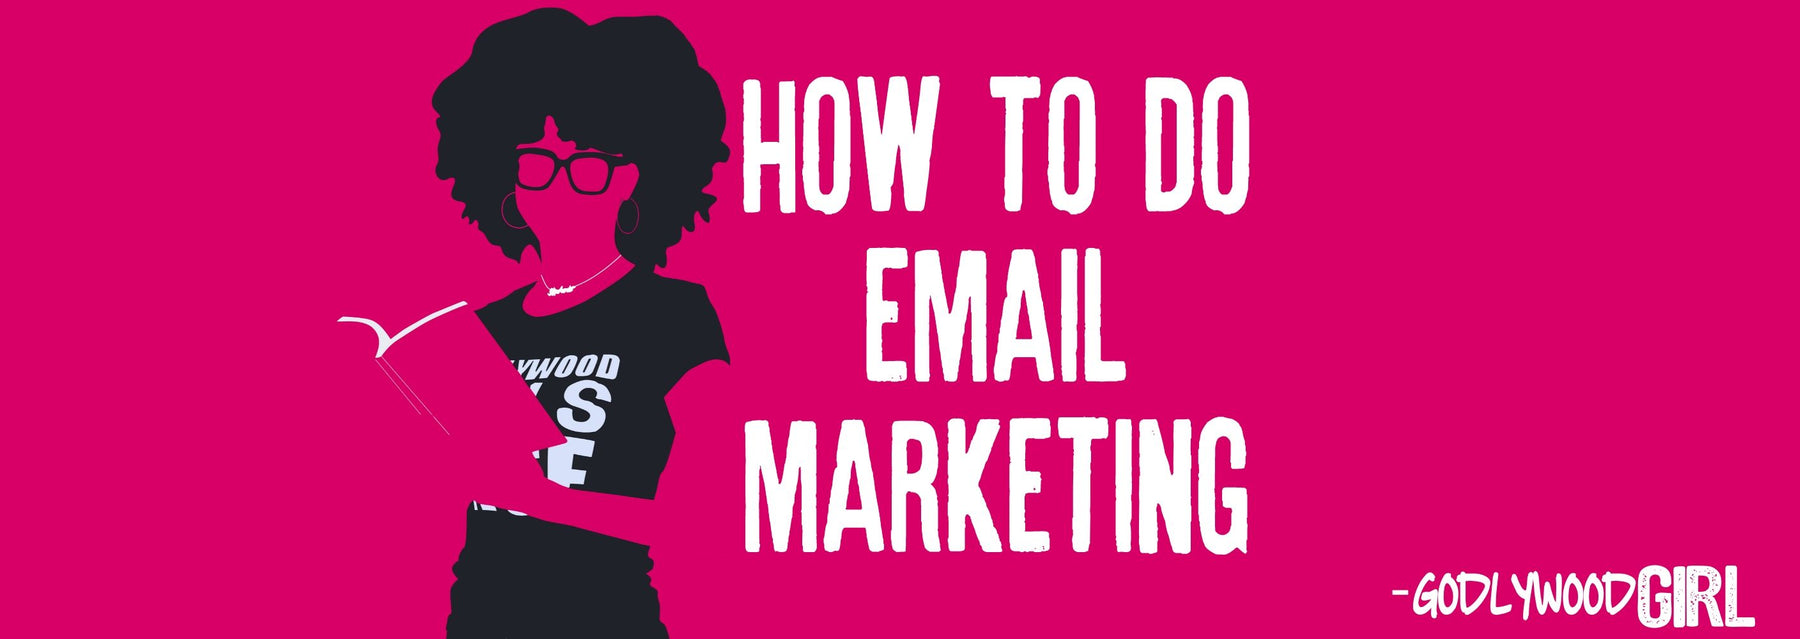 HOW TO DO EMAIL MARKETING | 3 Secret Steps To Start Email Marketing WITHOUT Getting Overwhelmed